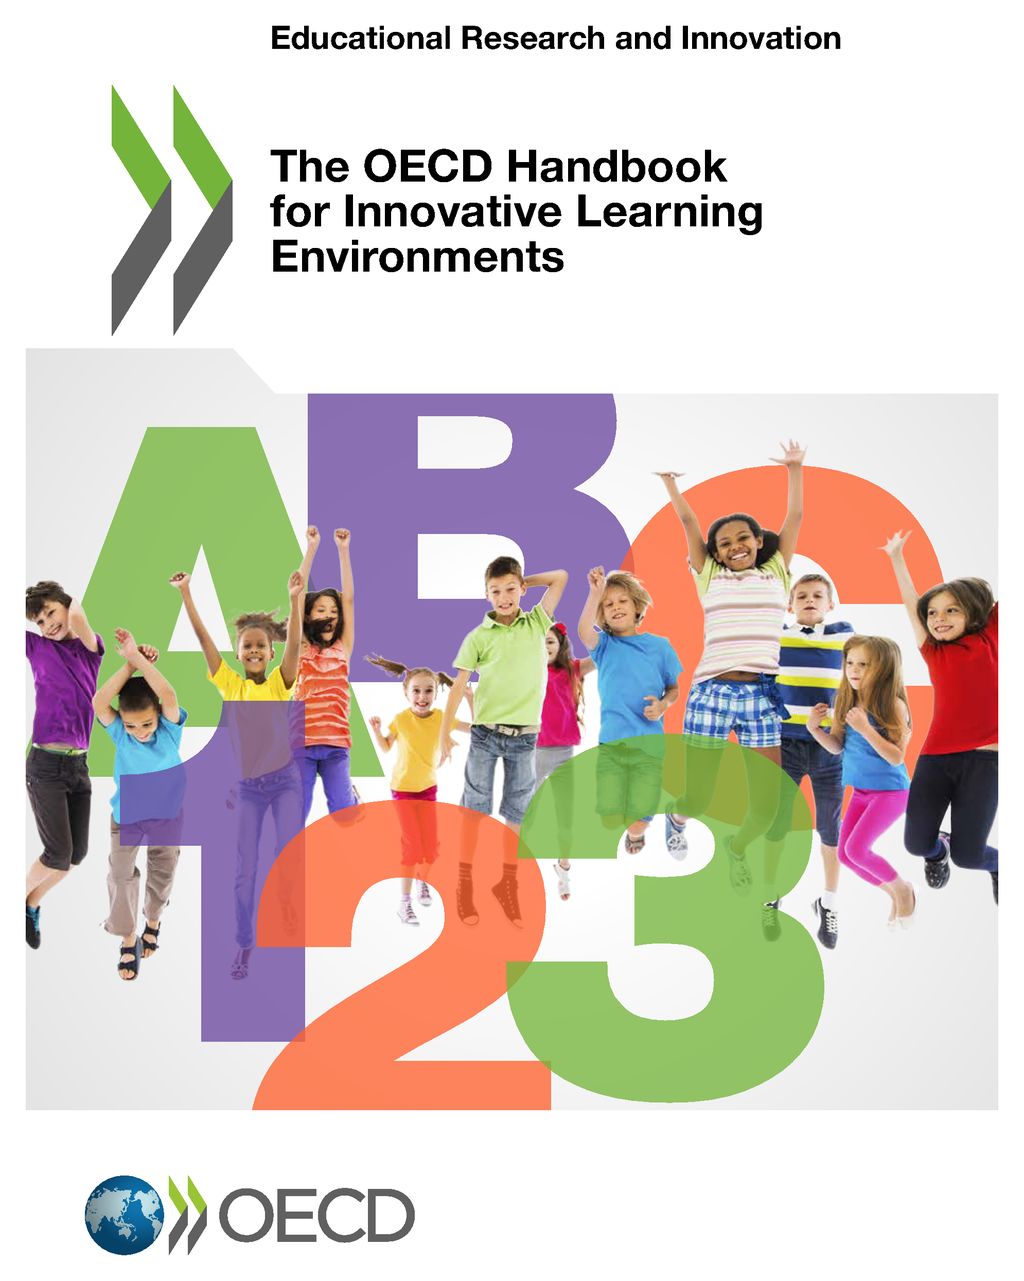 The OECD Handbook for Innovative Learning Environments